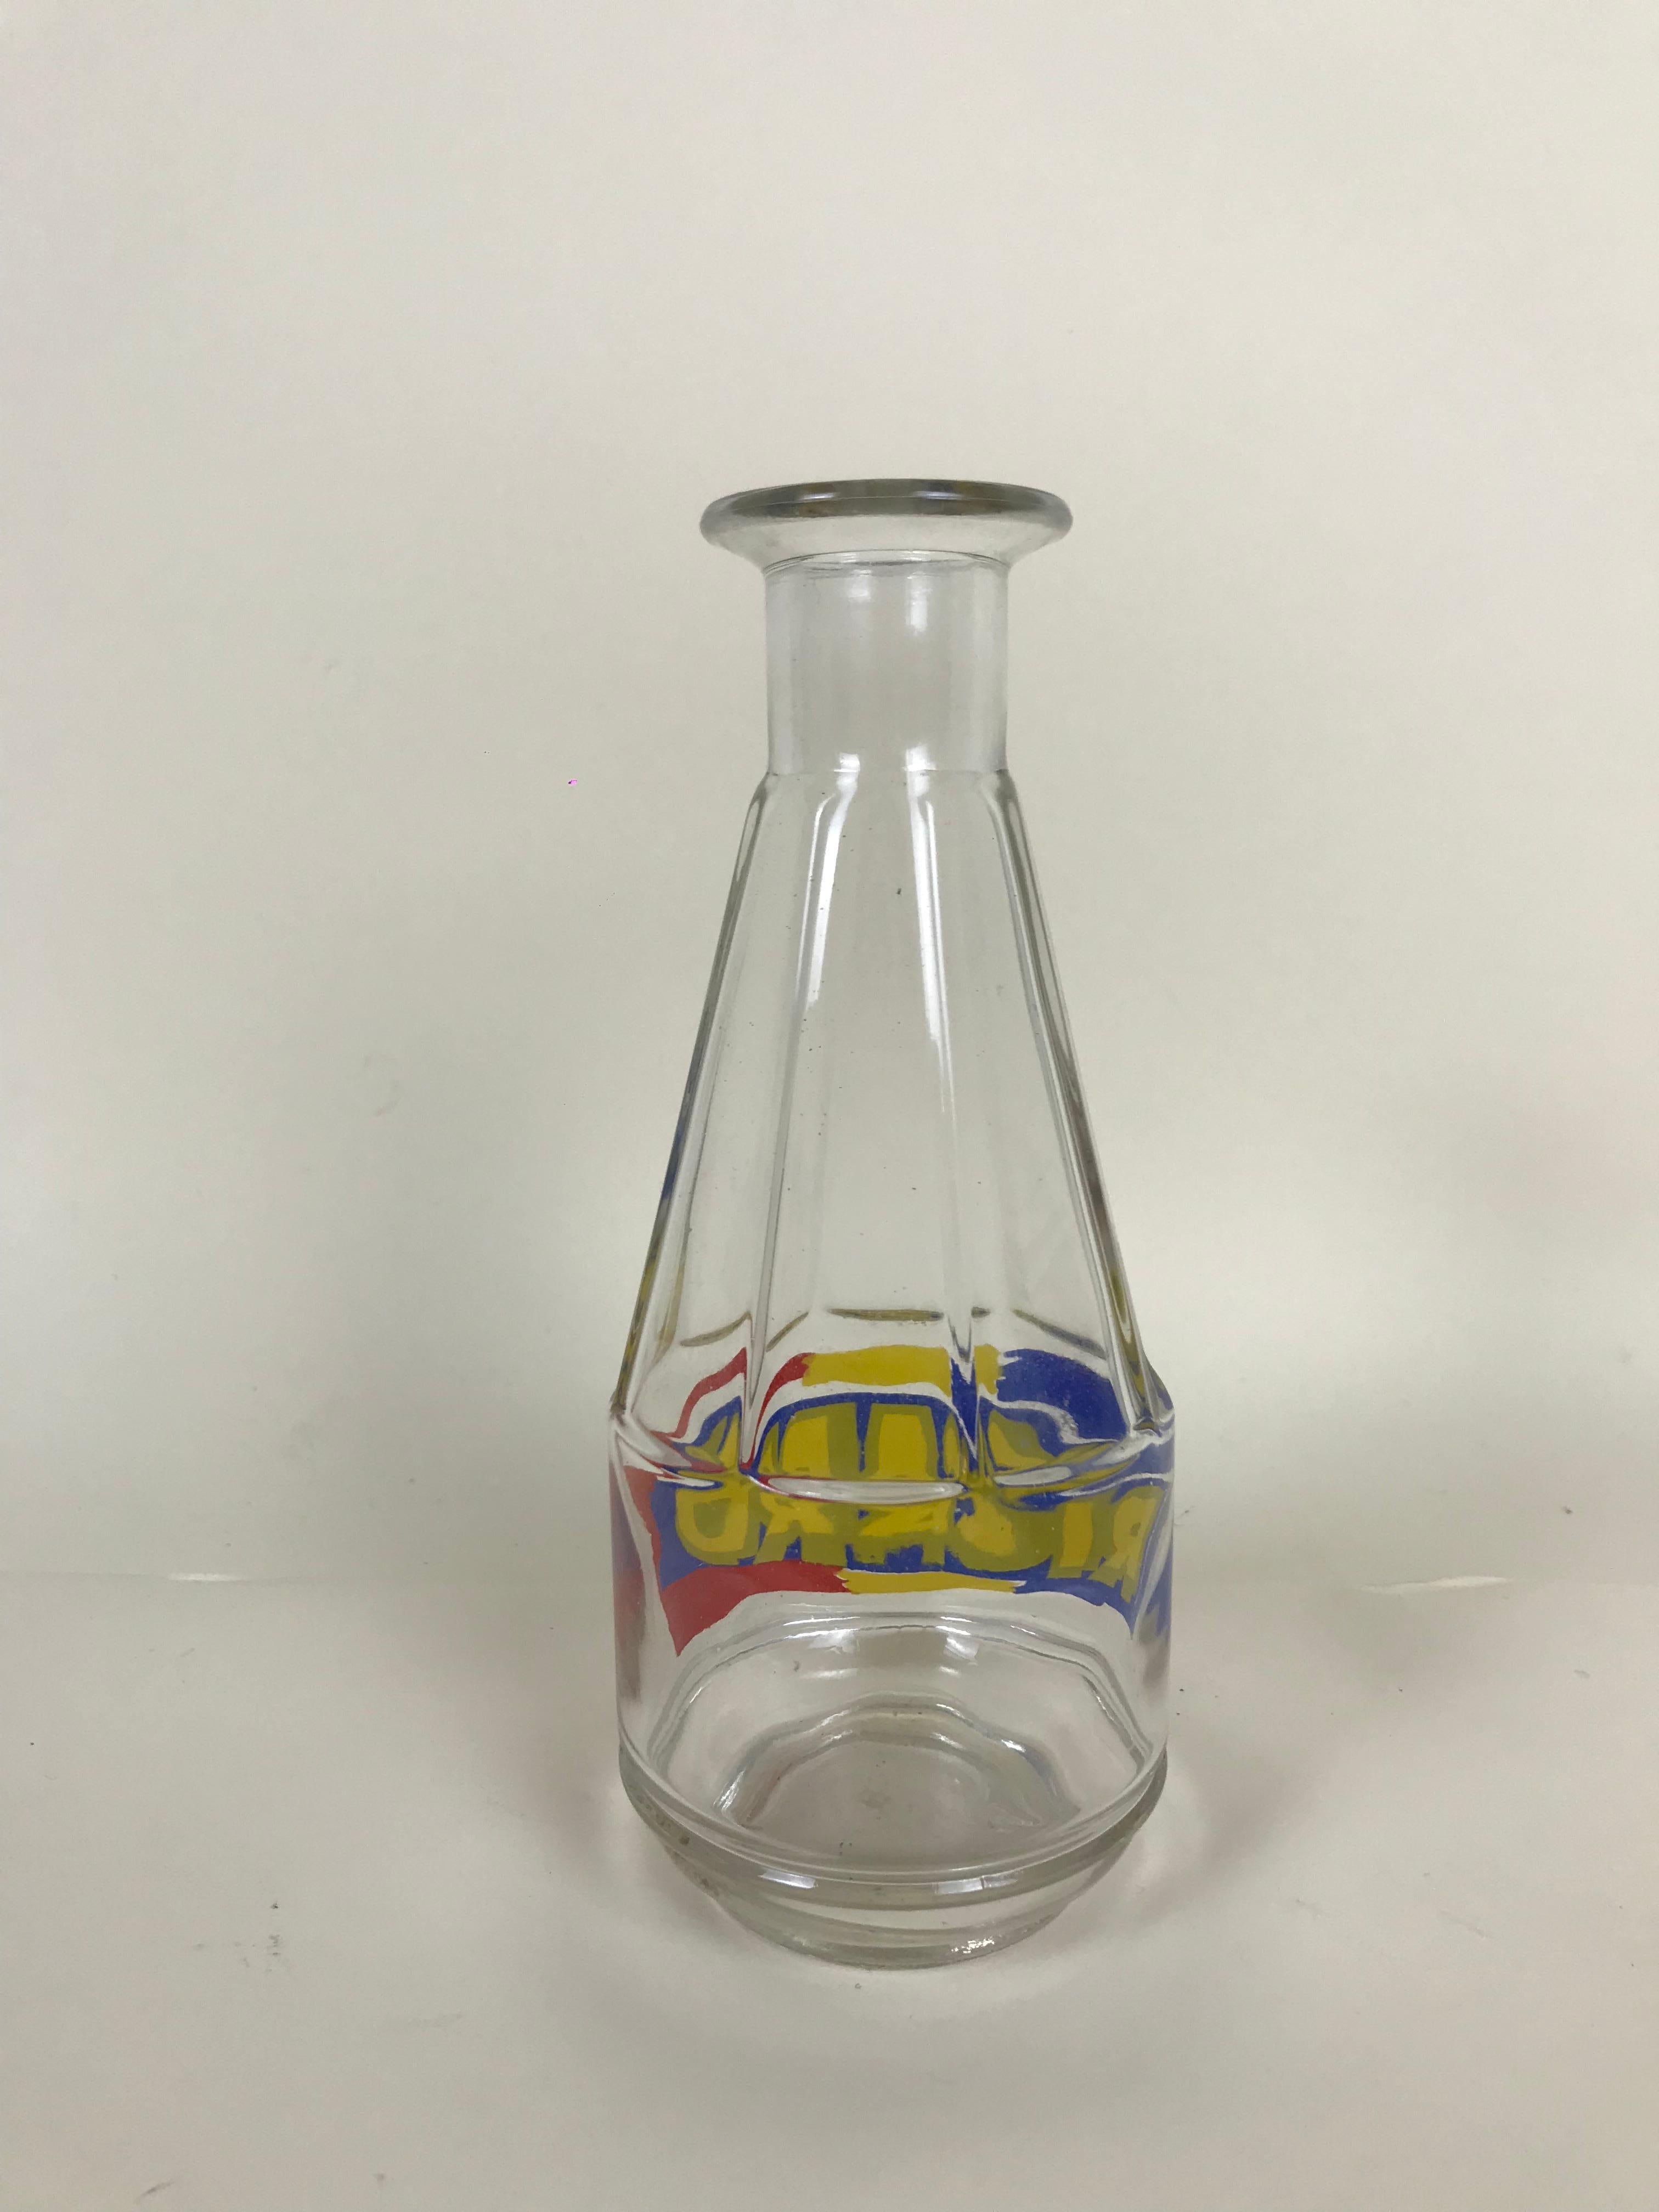 Vintage Ricard liquor decanter from mid century (1960s) French bistrò.
This liquor dispenser in transparent glass with Ricard logo in blue, yellow and red is a very chic addition to a rétro barware collection.

Collector's note:

Pernod Ricard